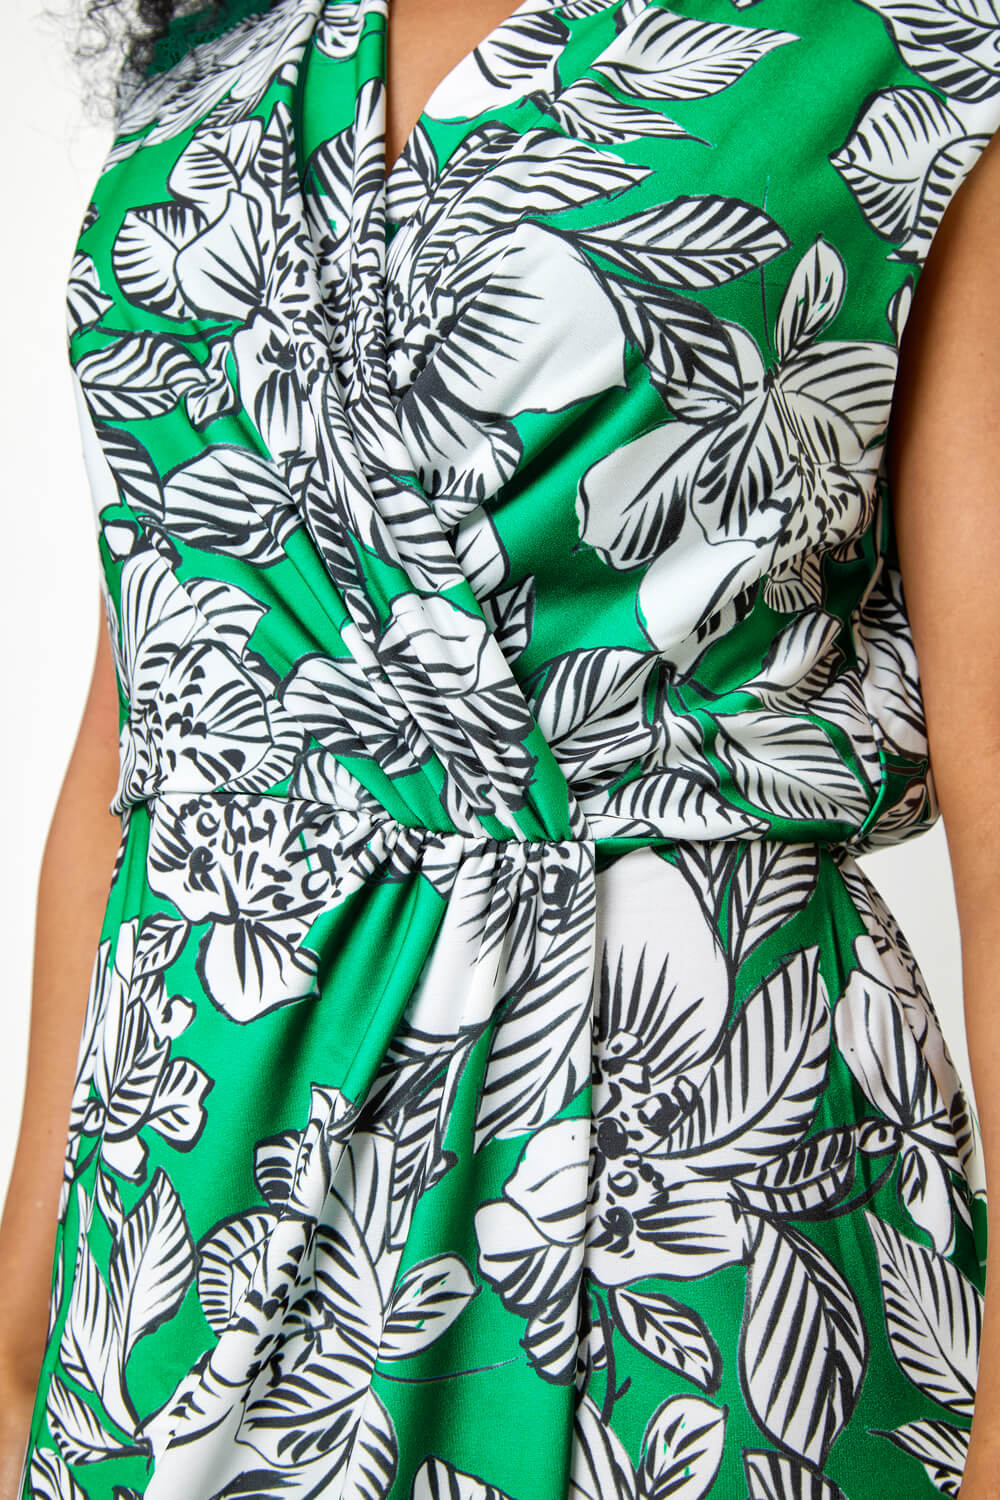 Green Petite Floral Ruched Wrap Dress, Image 5 of 5